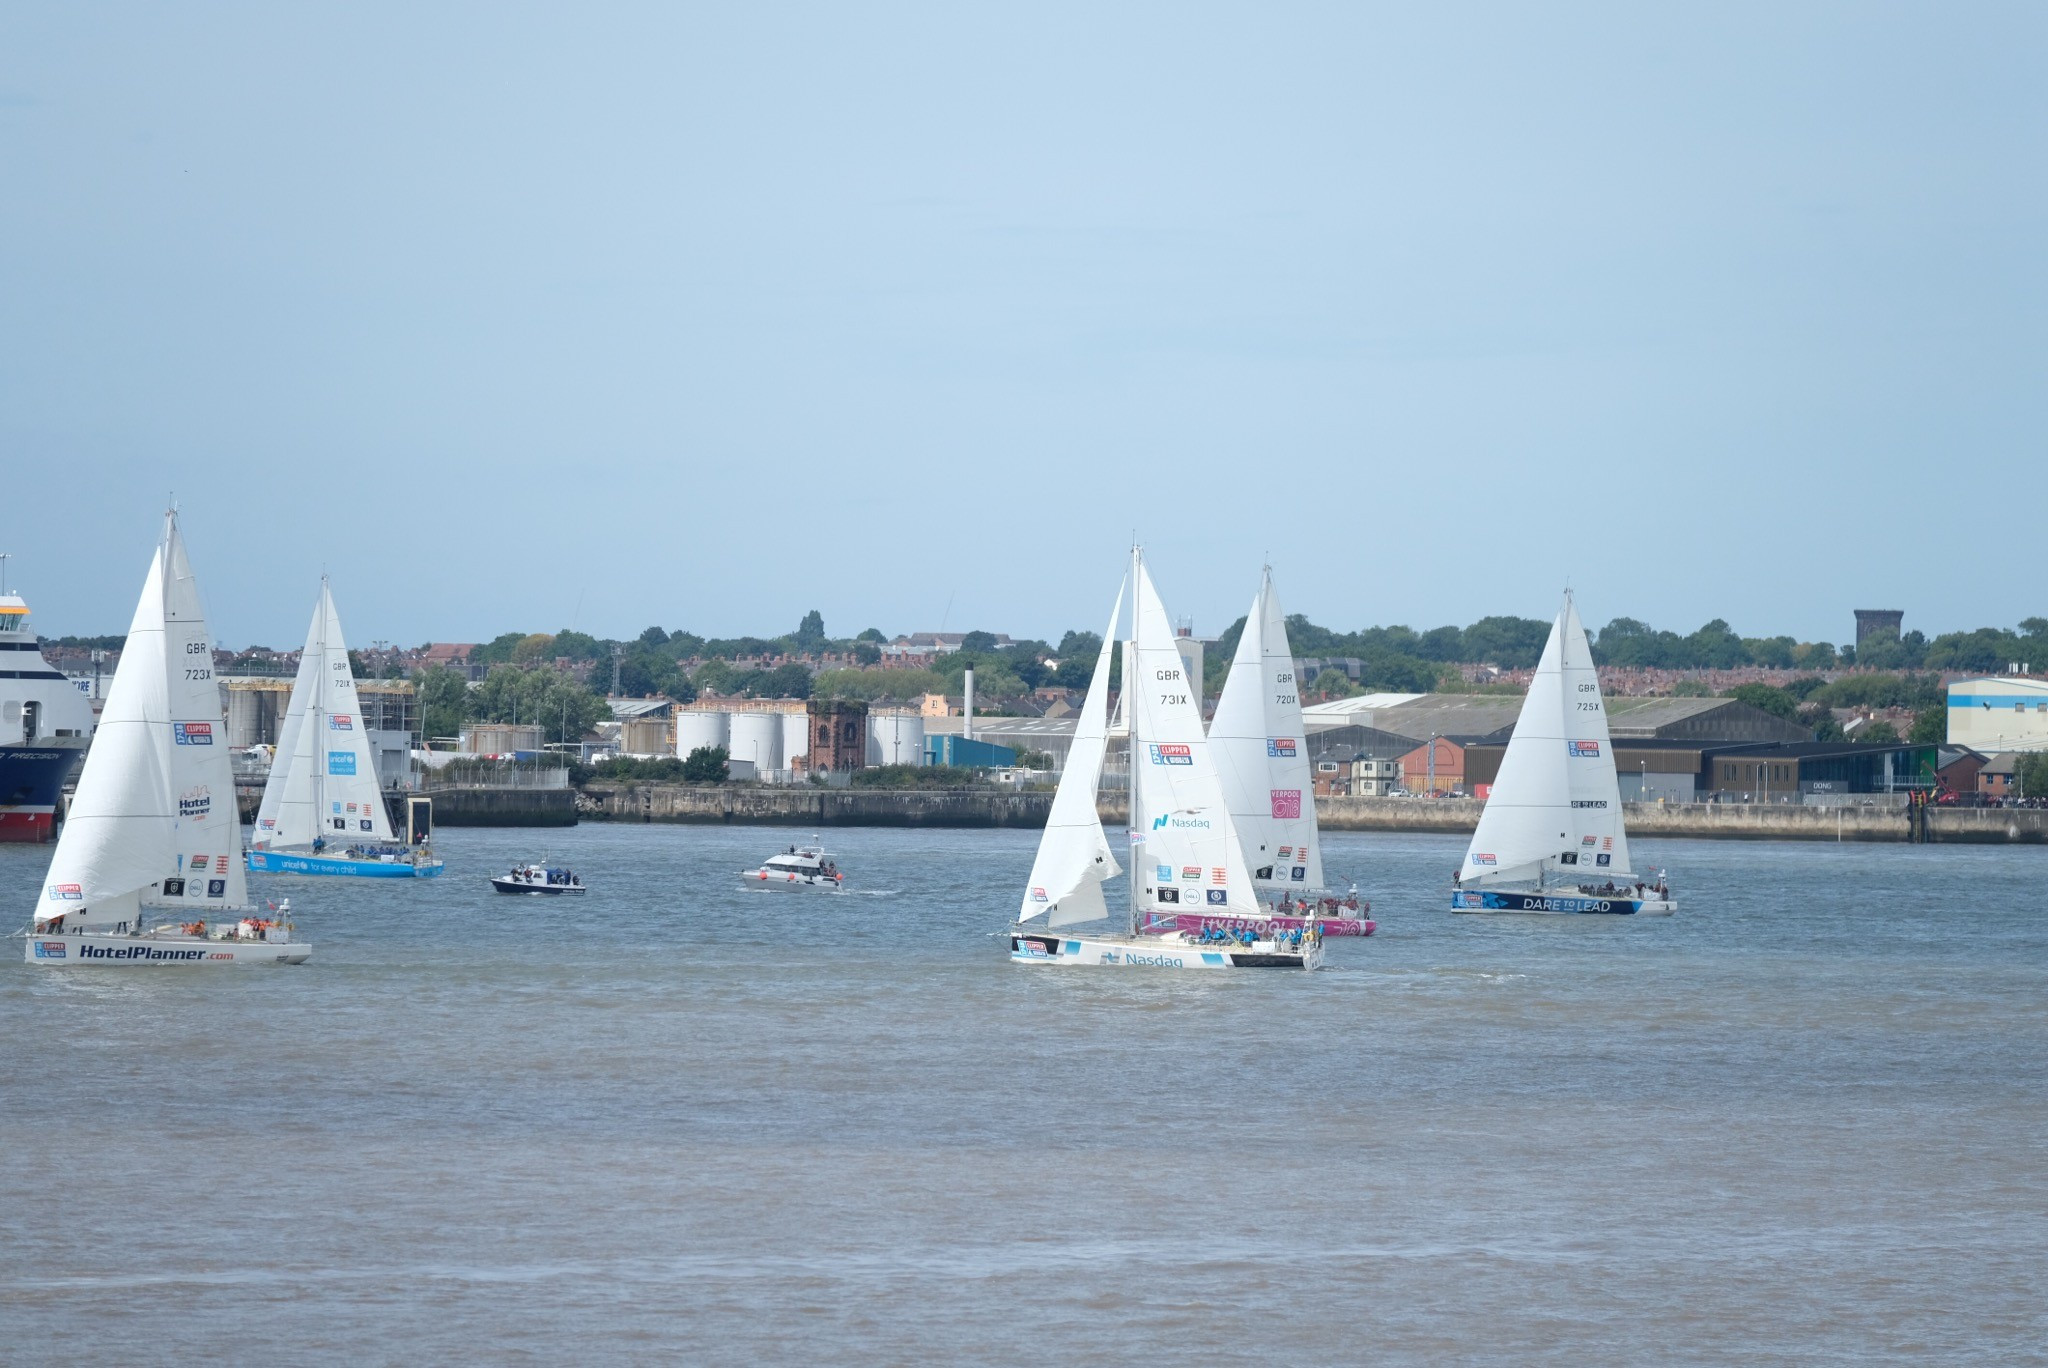 Liverpool 2022 bid chairman Brian Barwick has hailed the city’s hosting credentials after its waterfront staged the launch of the Clipper Round the World Yacht Race ©Liverpool 2022/Pete Carr